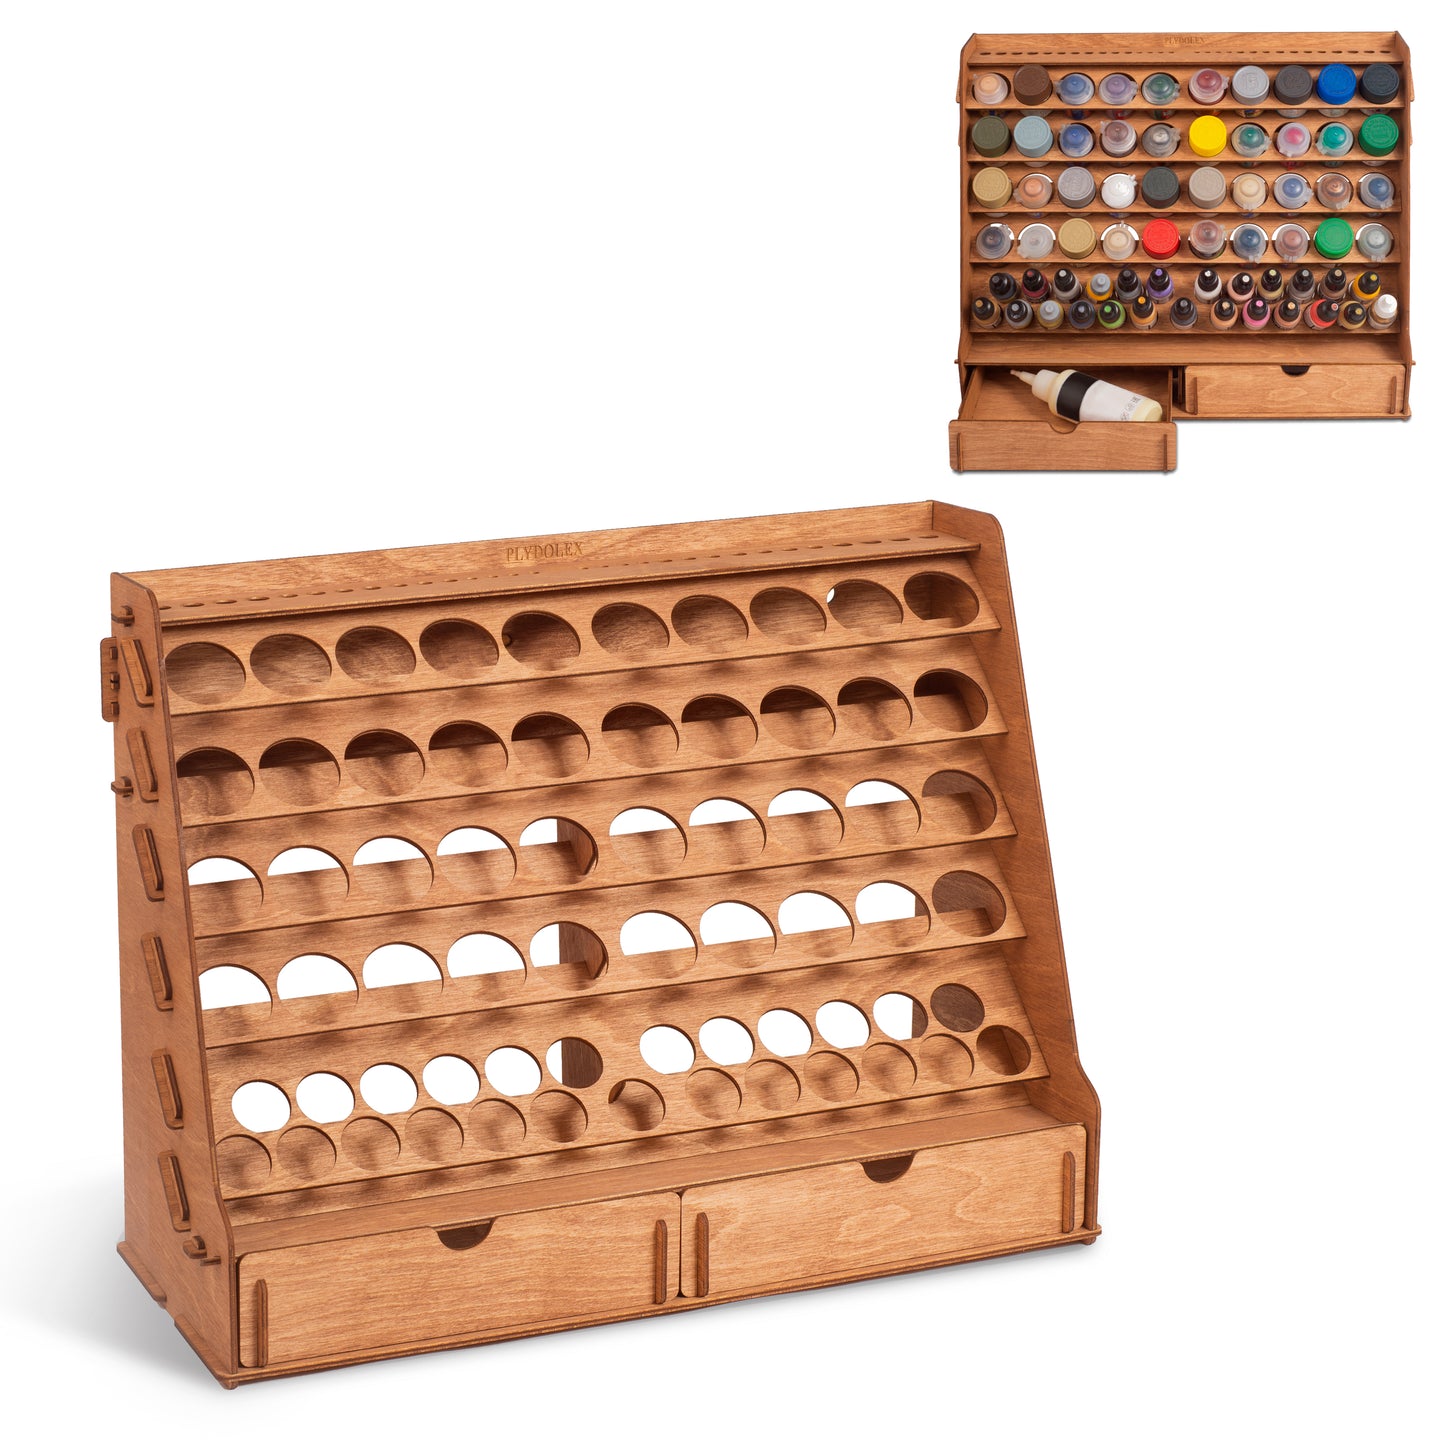 PLYDOLEX Wooden Craft Paint Storage Rack with 58 Holes for Paint Bottl –  Plywood Organizers for Miniaute Painters - Wooden HandCraft Gift and  Accessories by Plydolex